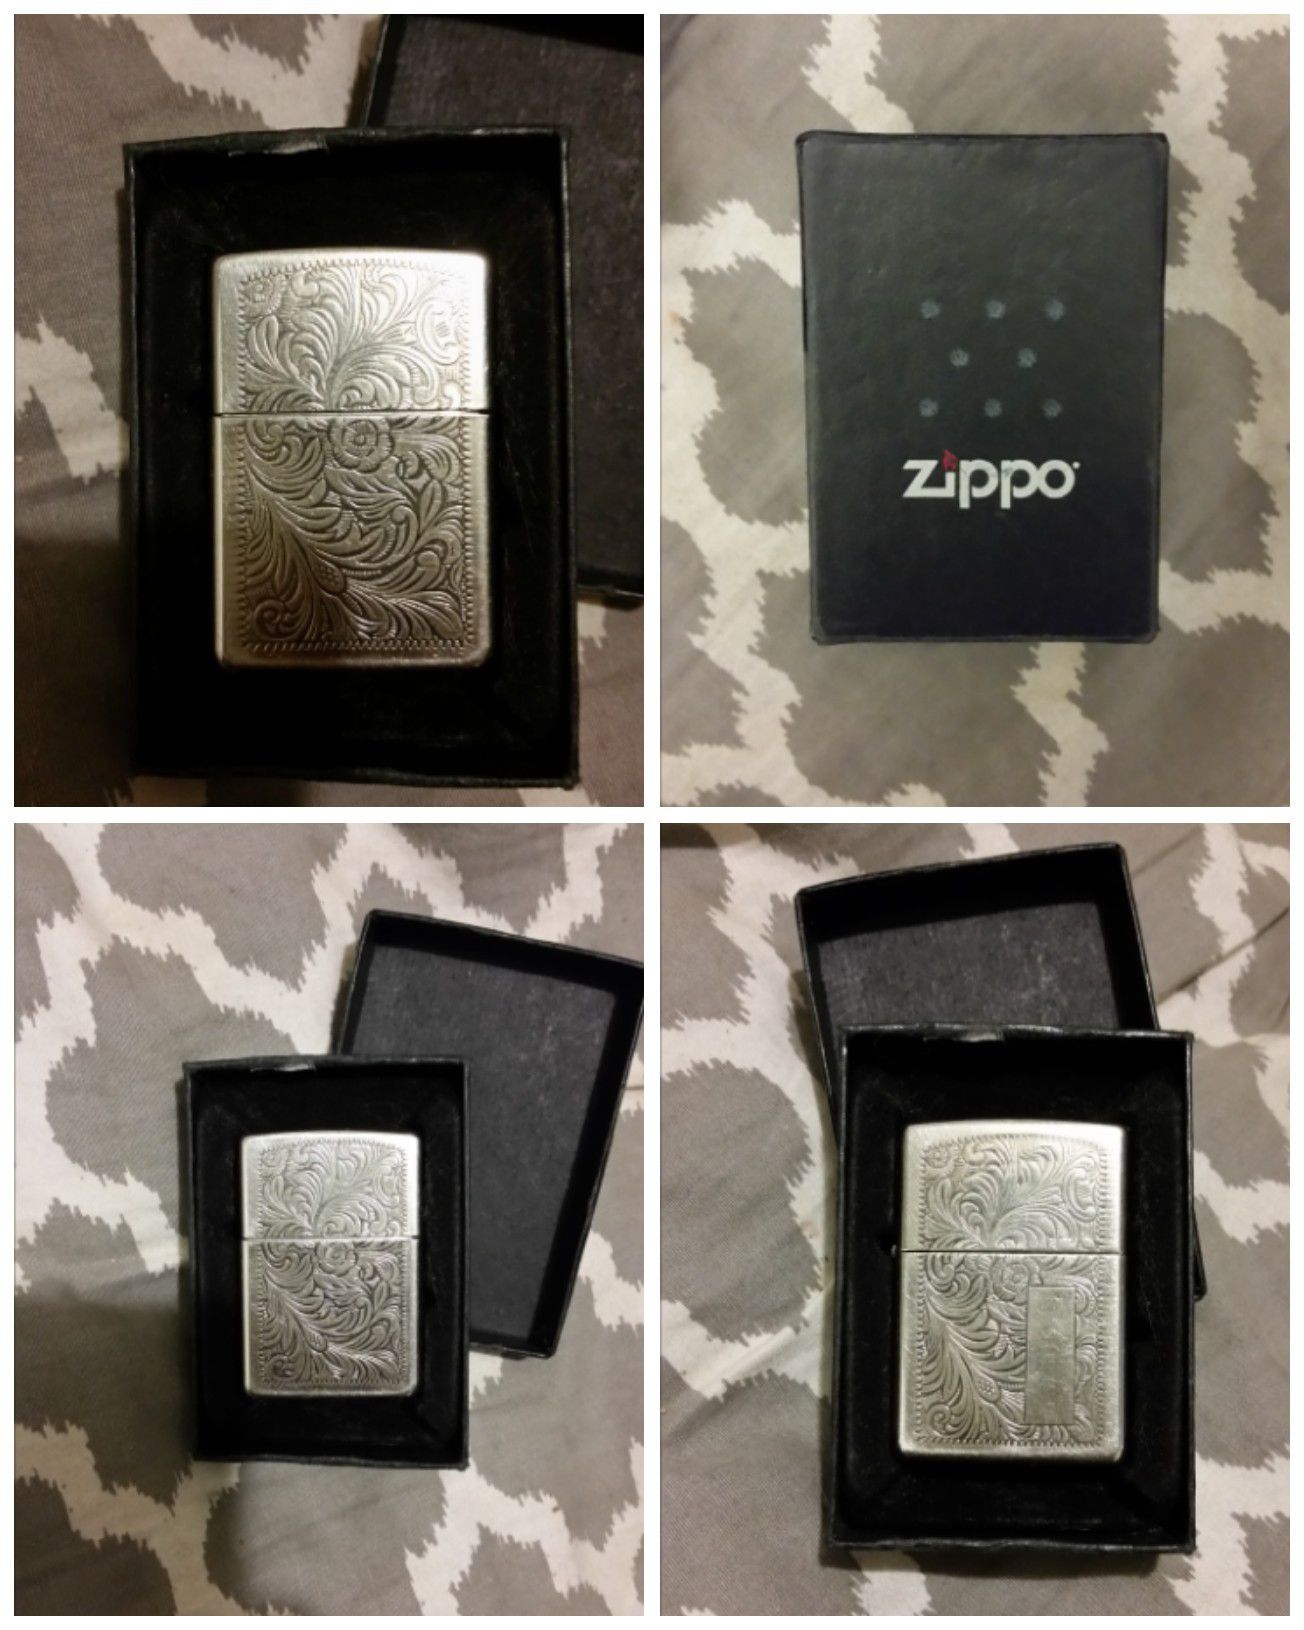 Here is a vintage STERLING SILVER plated zippo